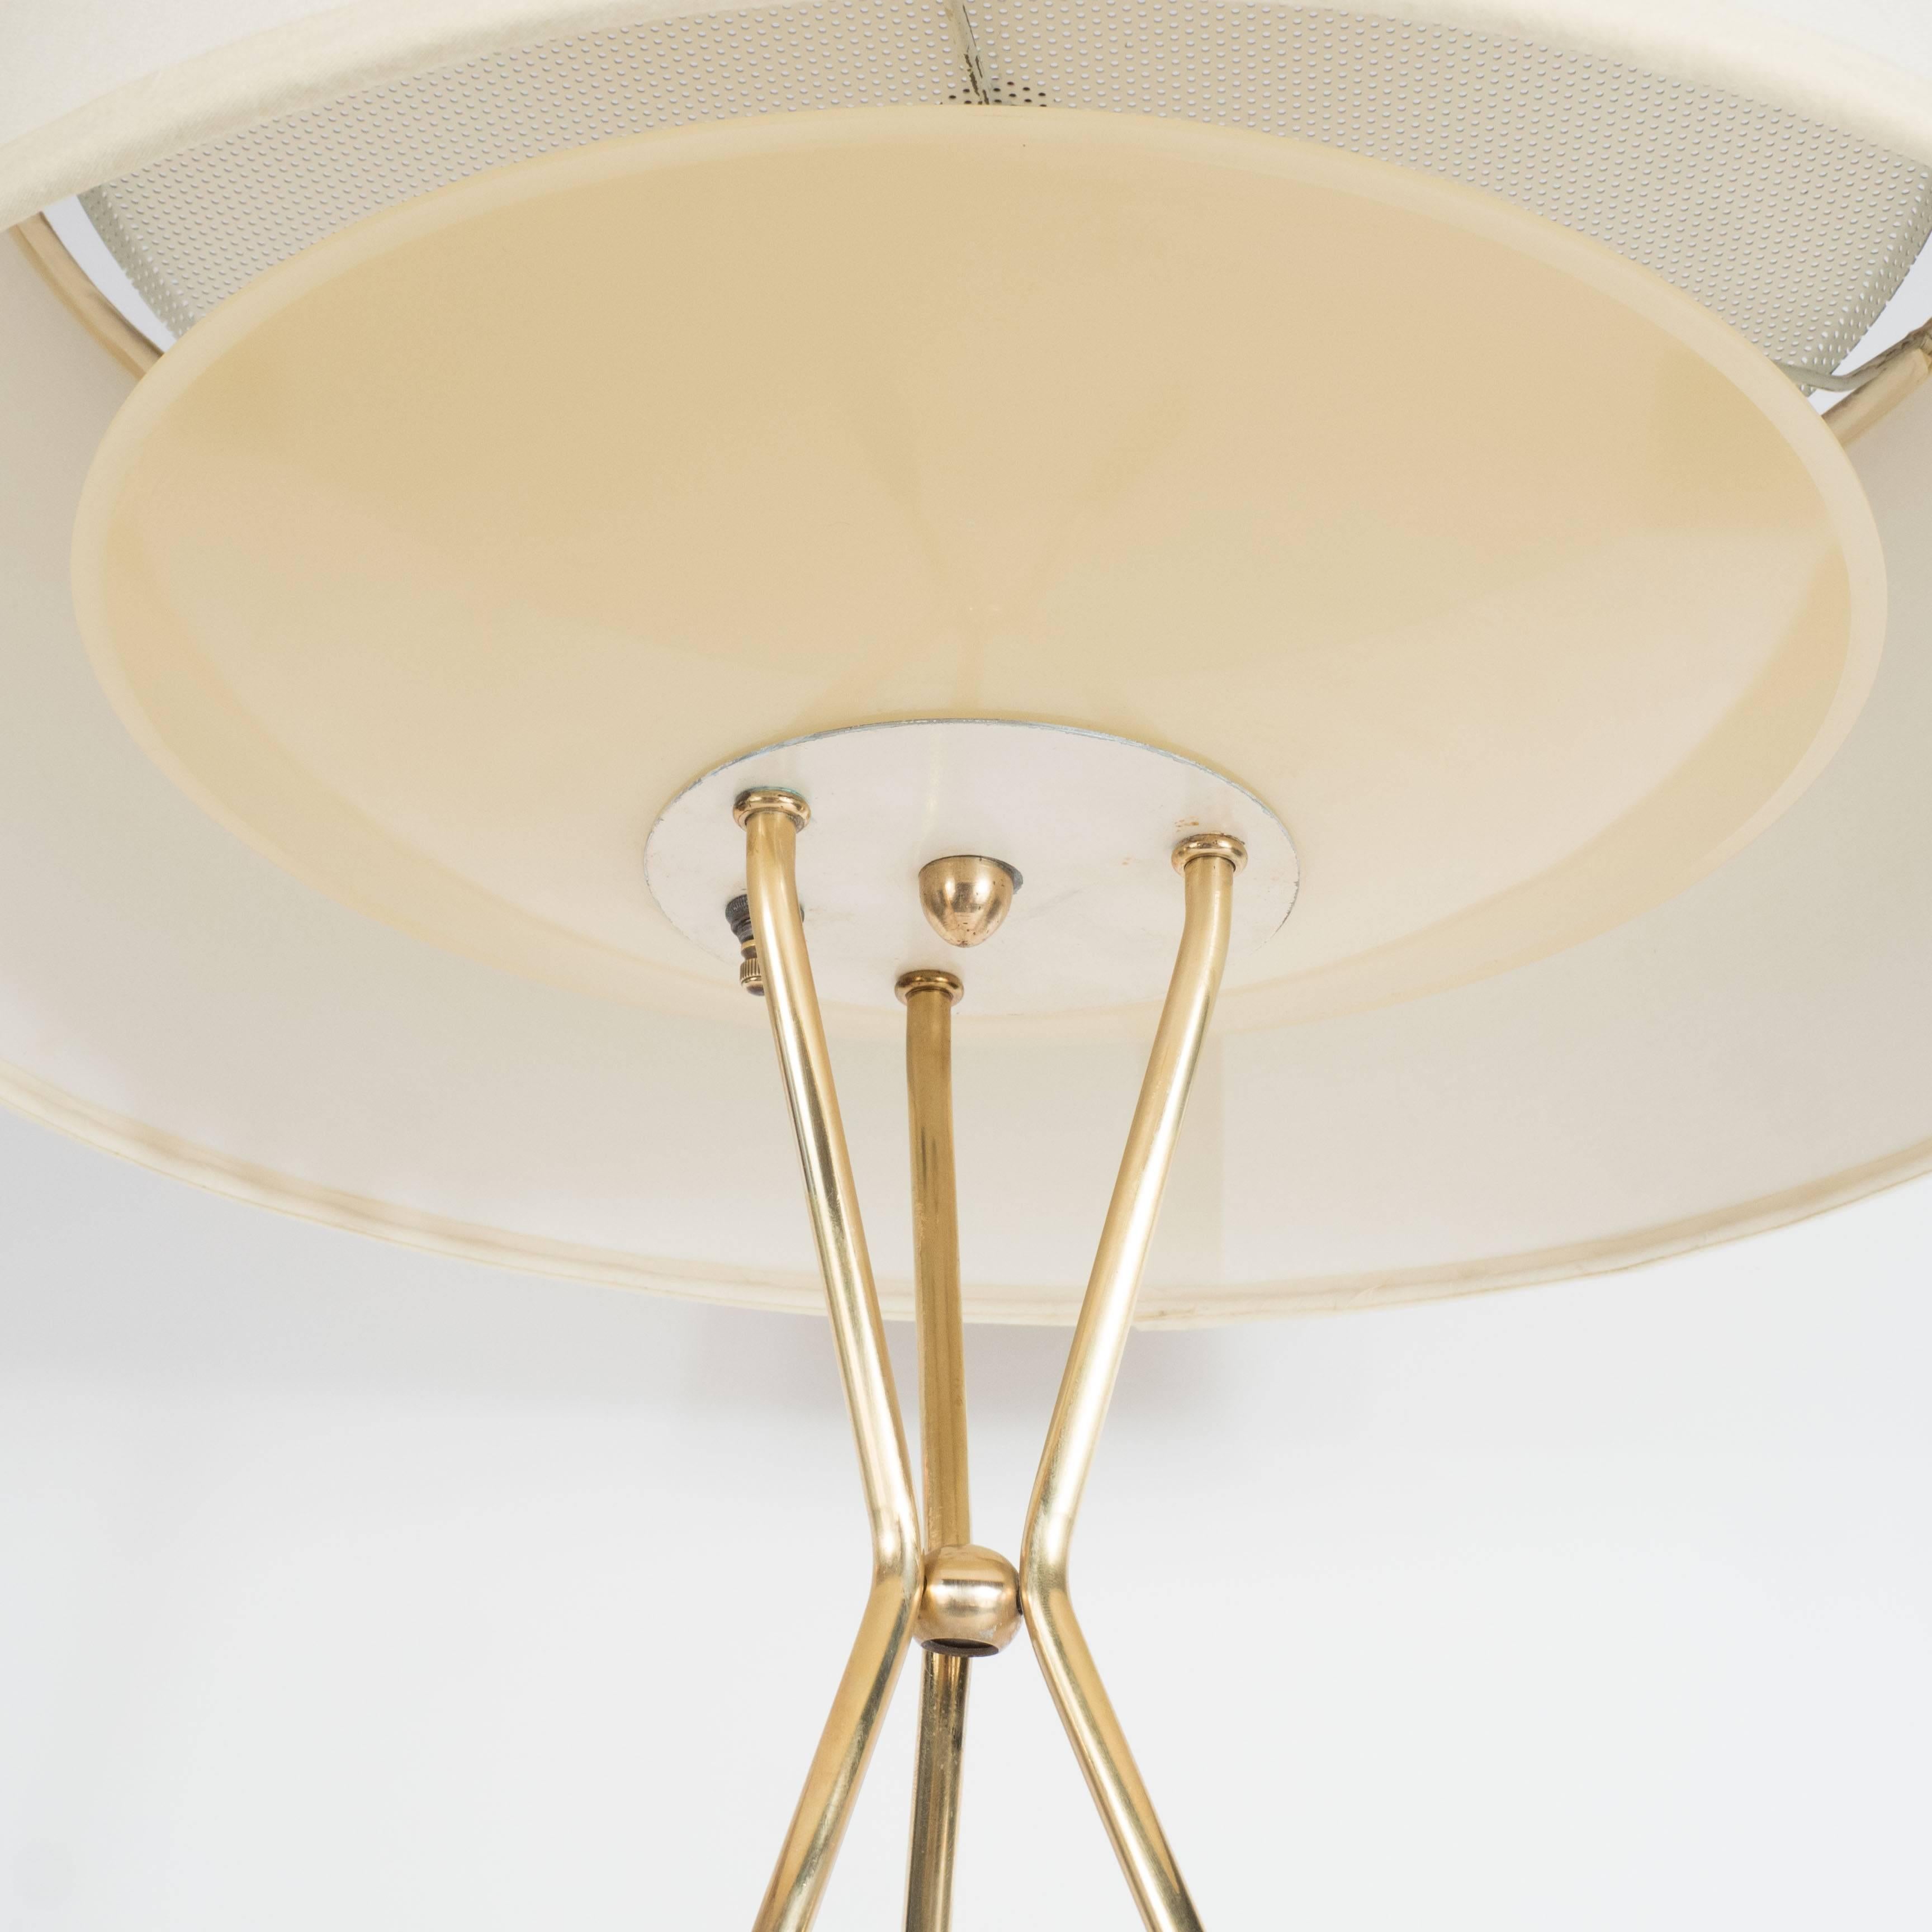 Brass Pair of Mid-Century Tripod Table Lamps by Gerald Thurston for Lightolier